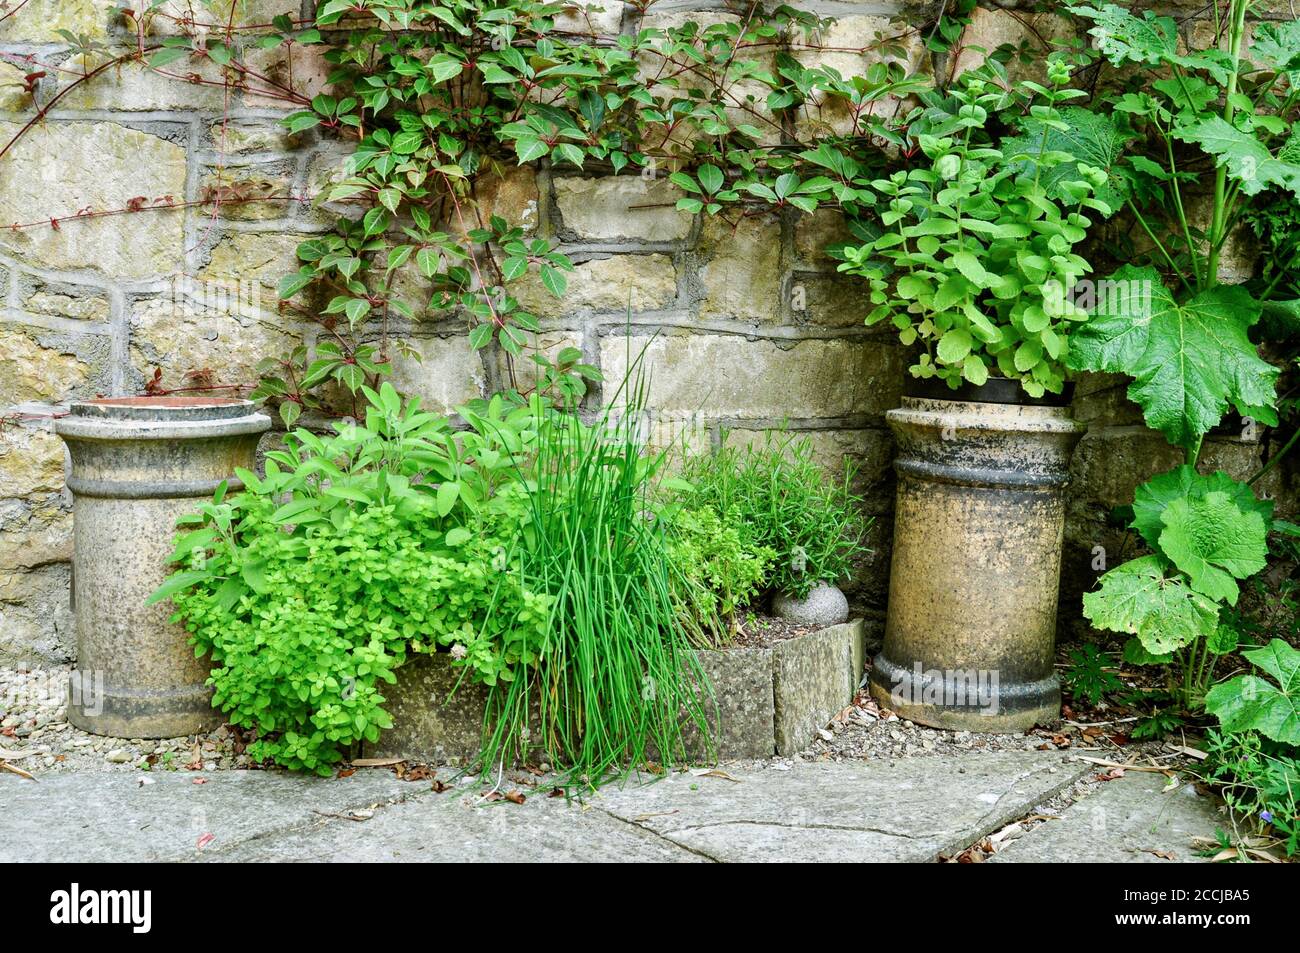 An arrangement of a variety of stone pots and planters with herbs and trailing ivy. In a walled  cottage garden setting. Stock Photo